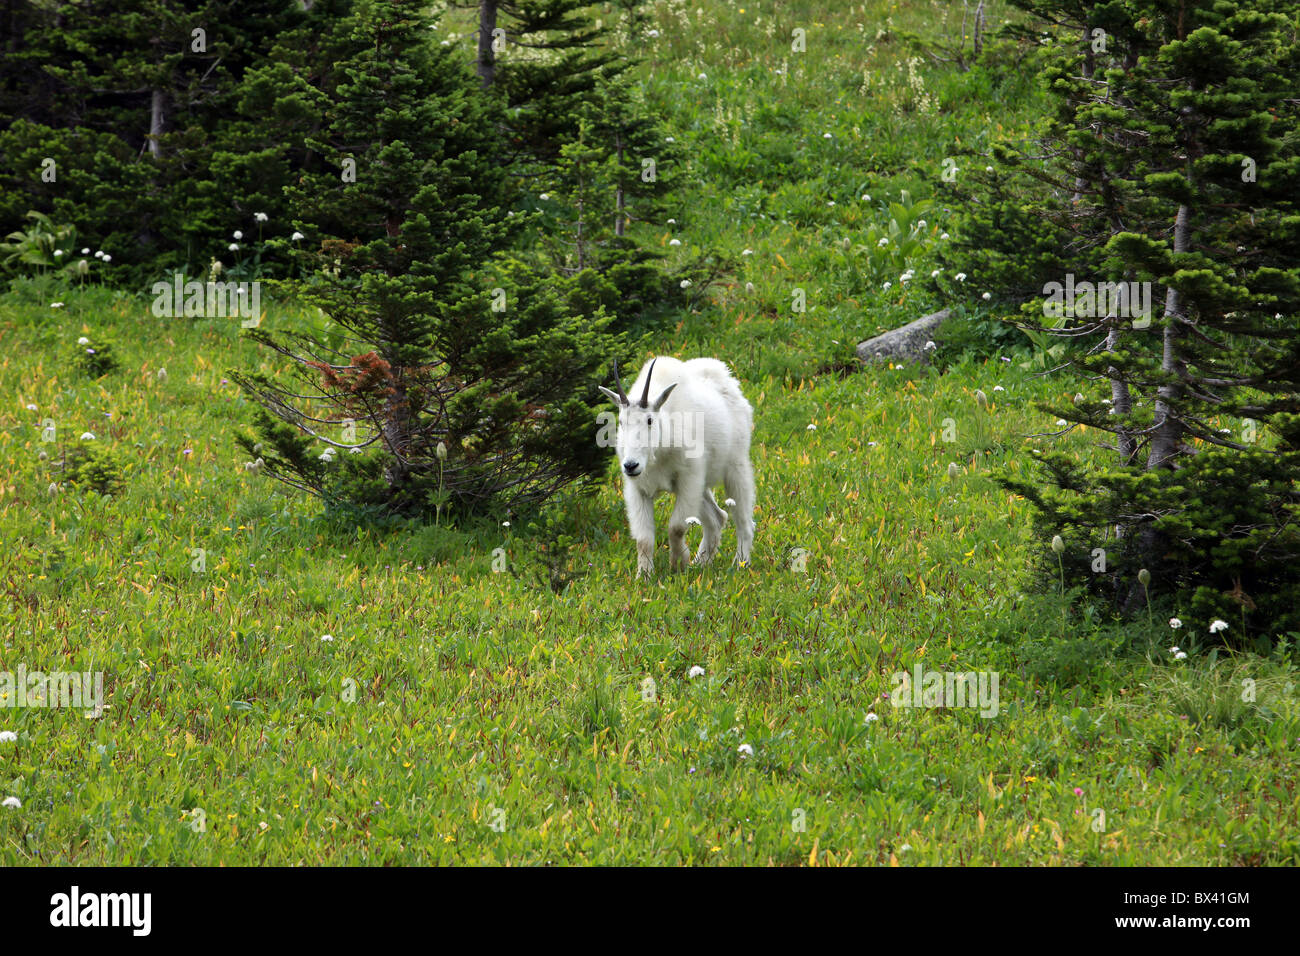 mature mountain billy goat with horns walking in a green meadow with pine trees at Glacier National Park, Montana, USA Stock Photo